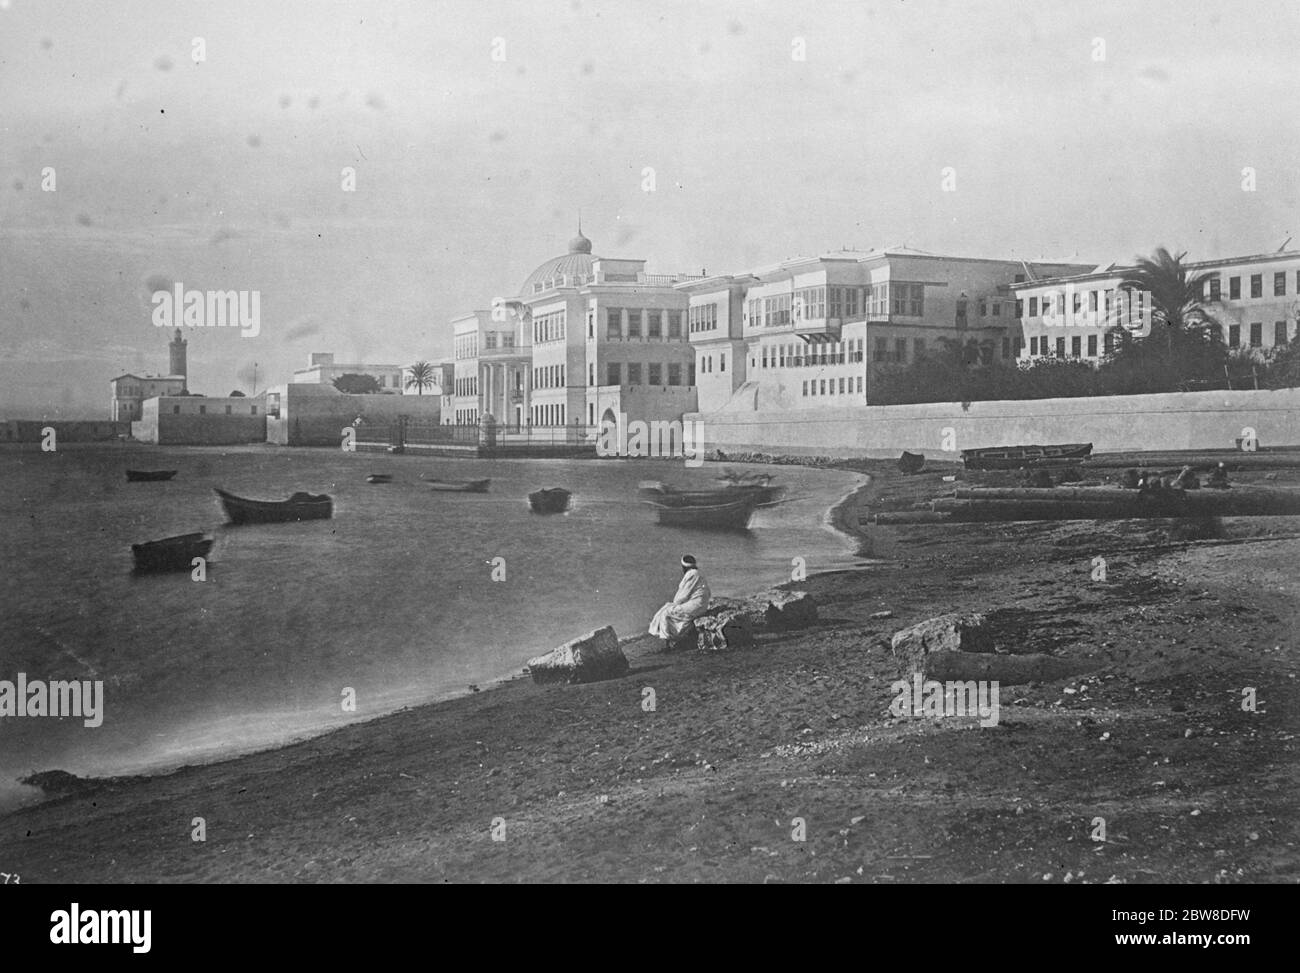 The Prince ' s Tour . Rasel el Tin Palace , Alexandria , where the Prince of Wales and the Duke of Gloucester will be entertained to lunch by King Fuad of Egypt on the 12th September . 5 September 1928 Stock Photo